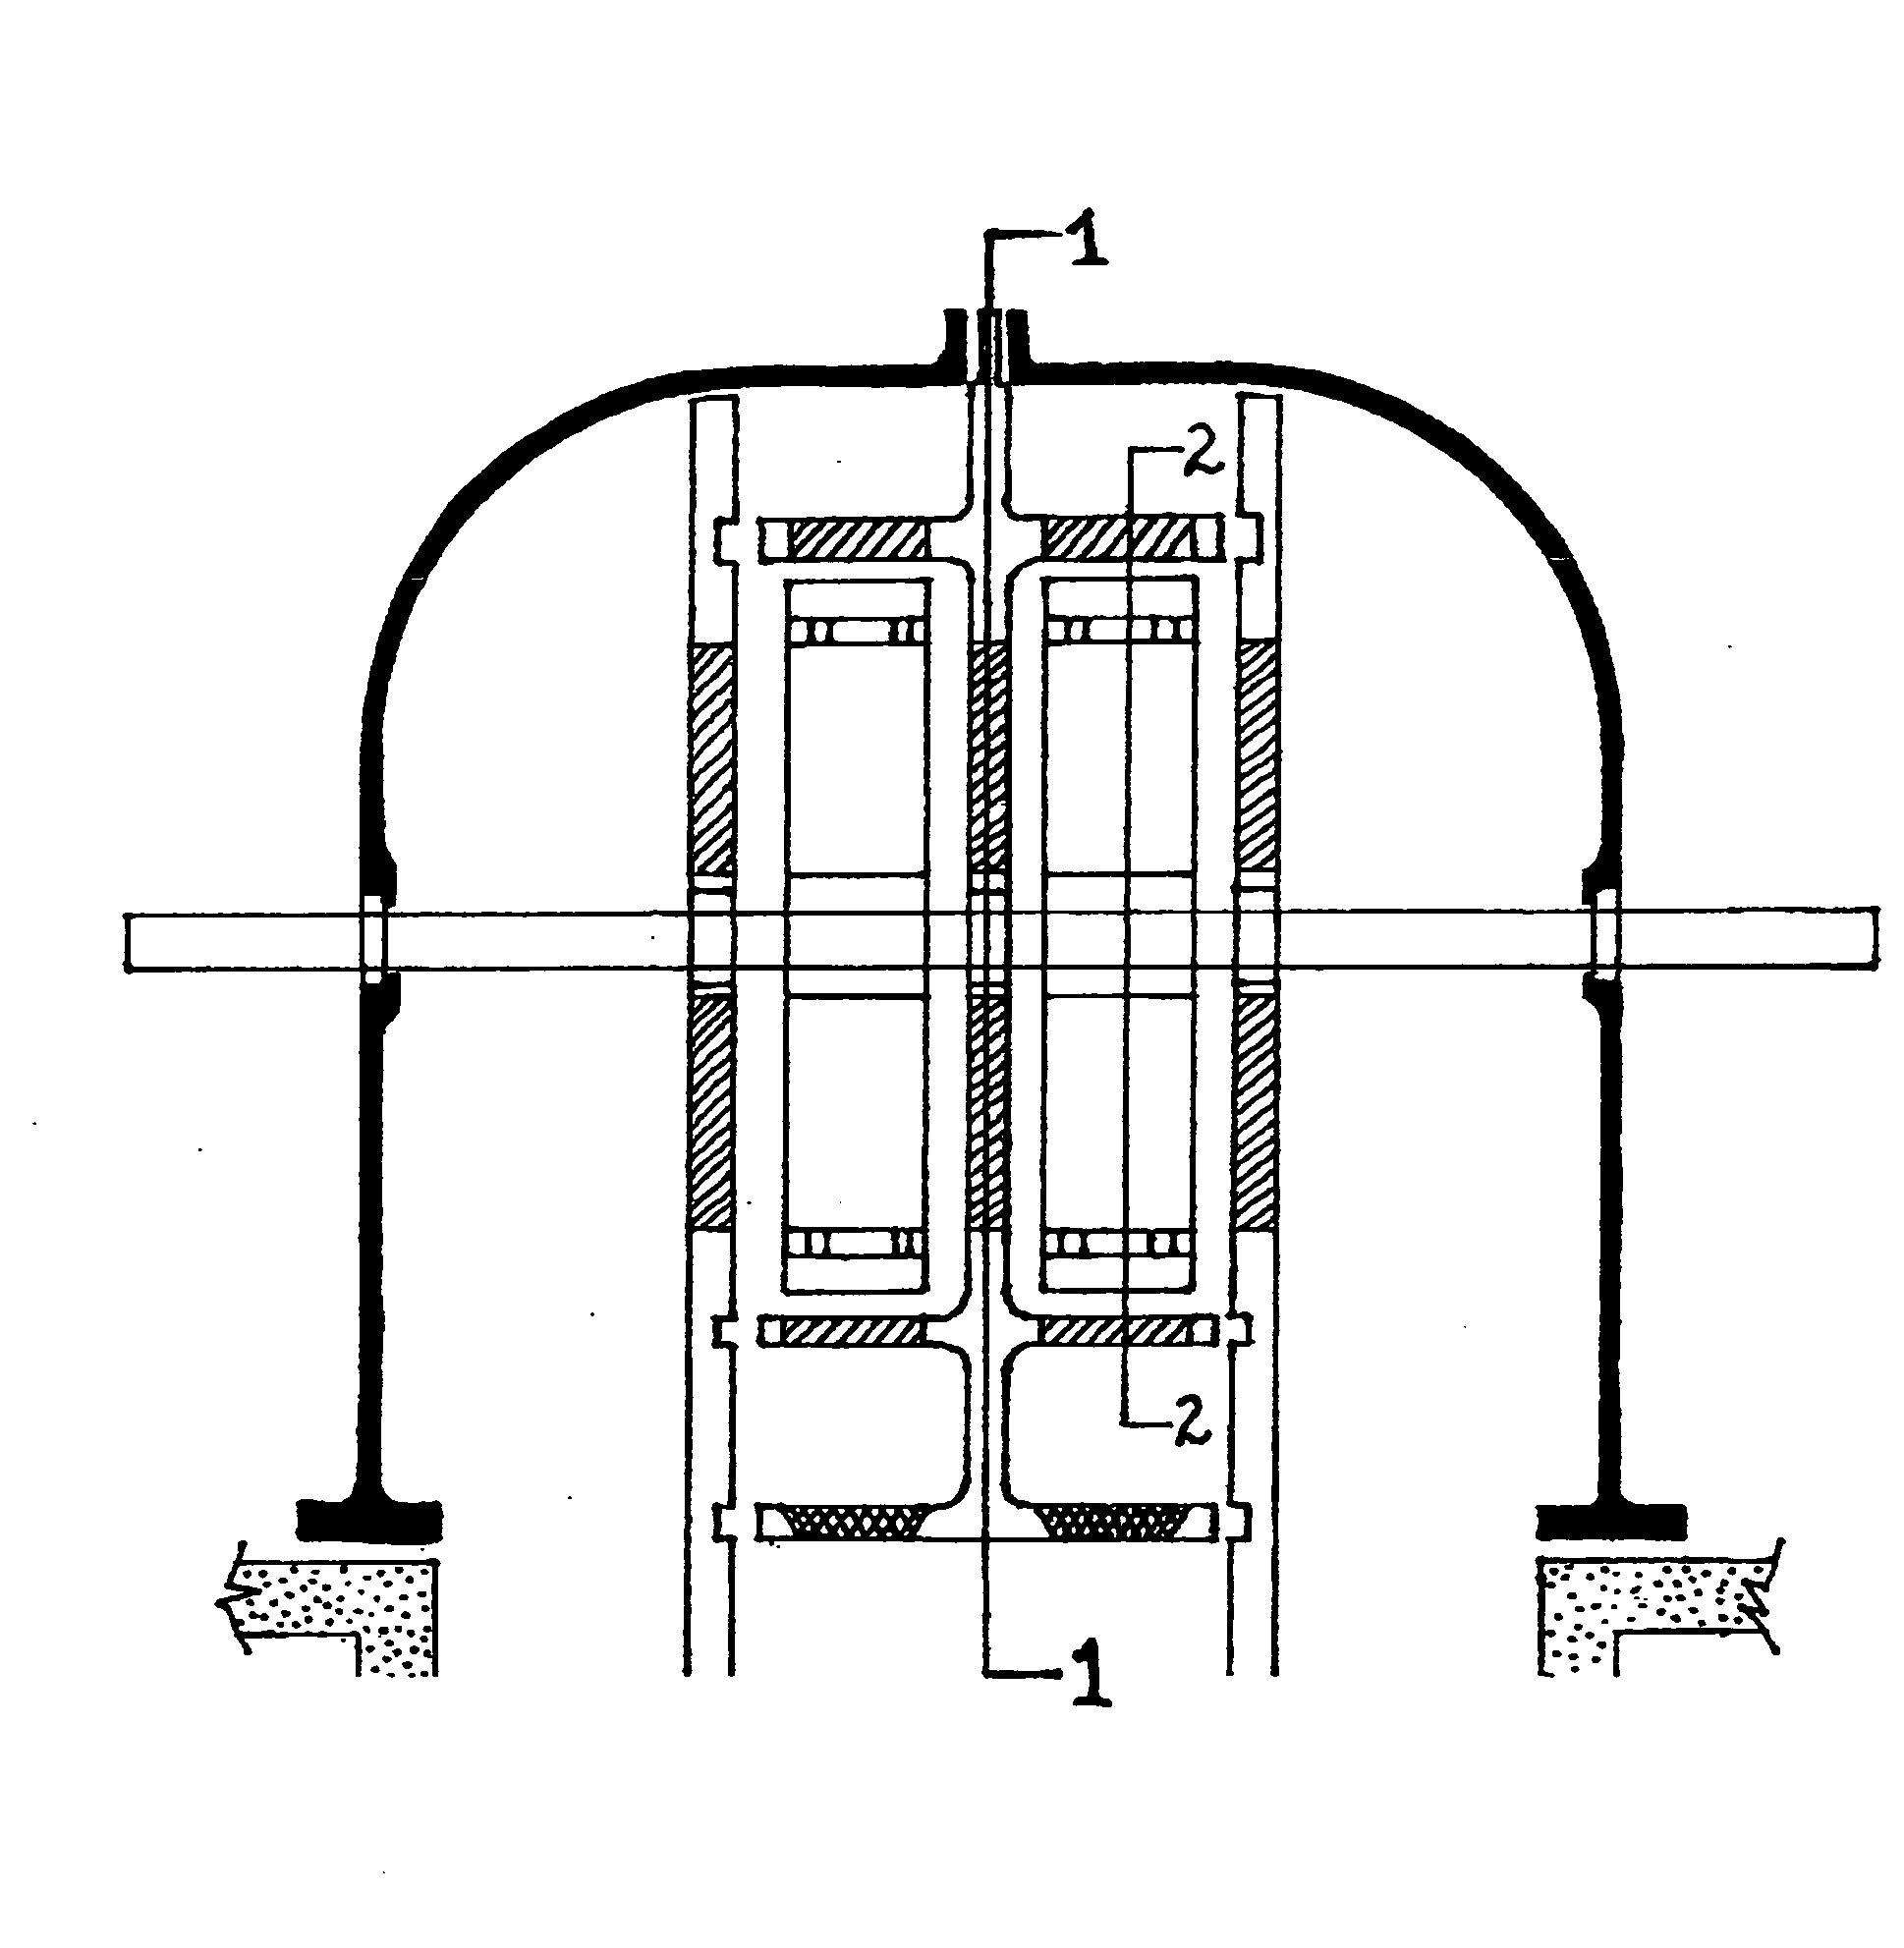 Wave energy turbine for oscillating water column systems